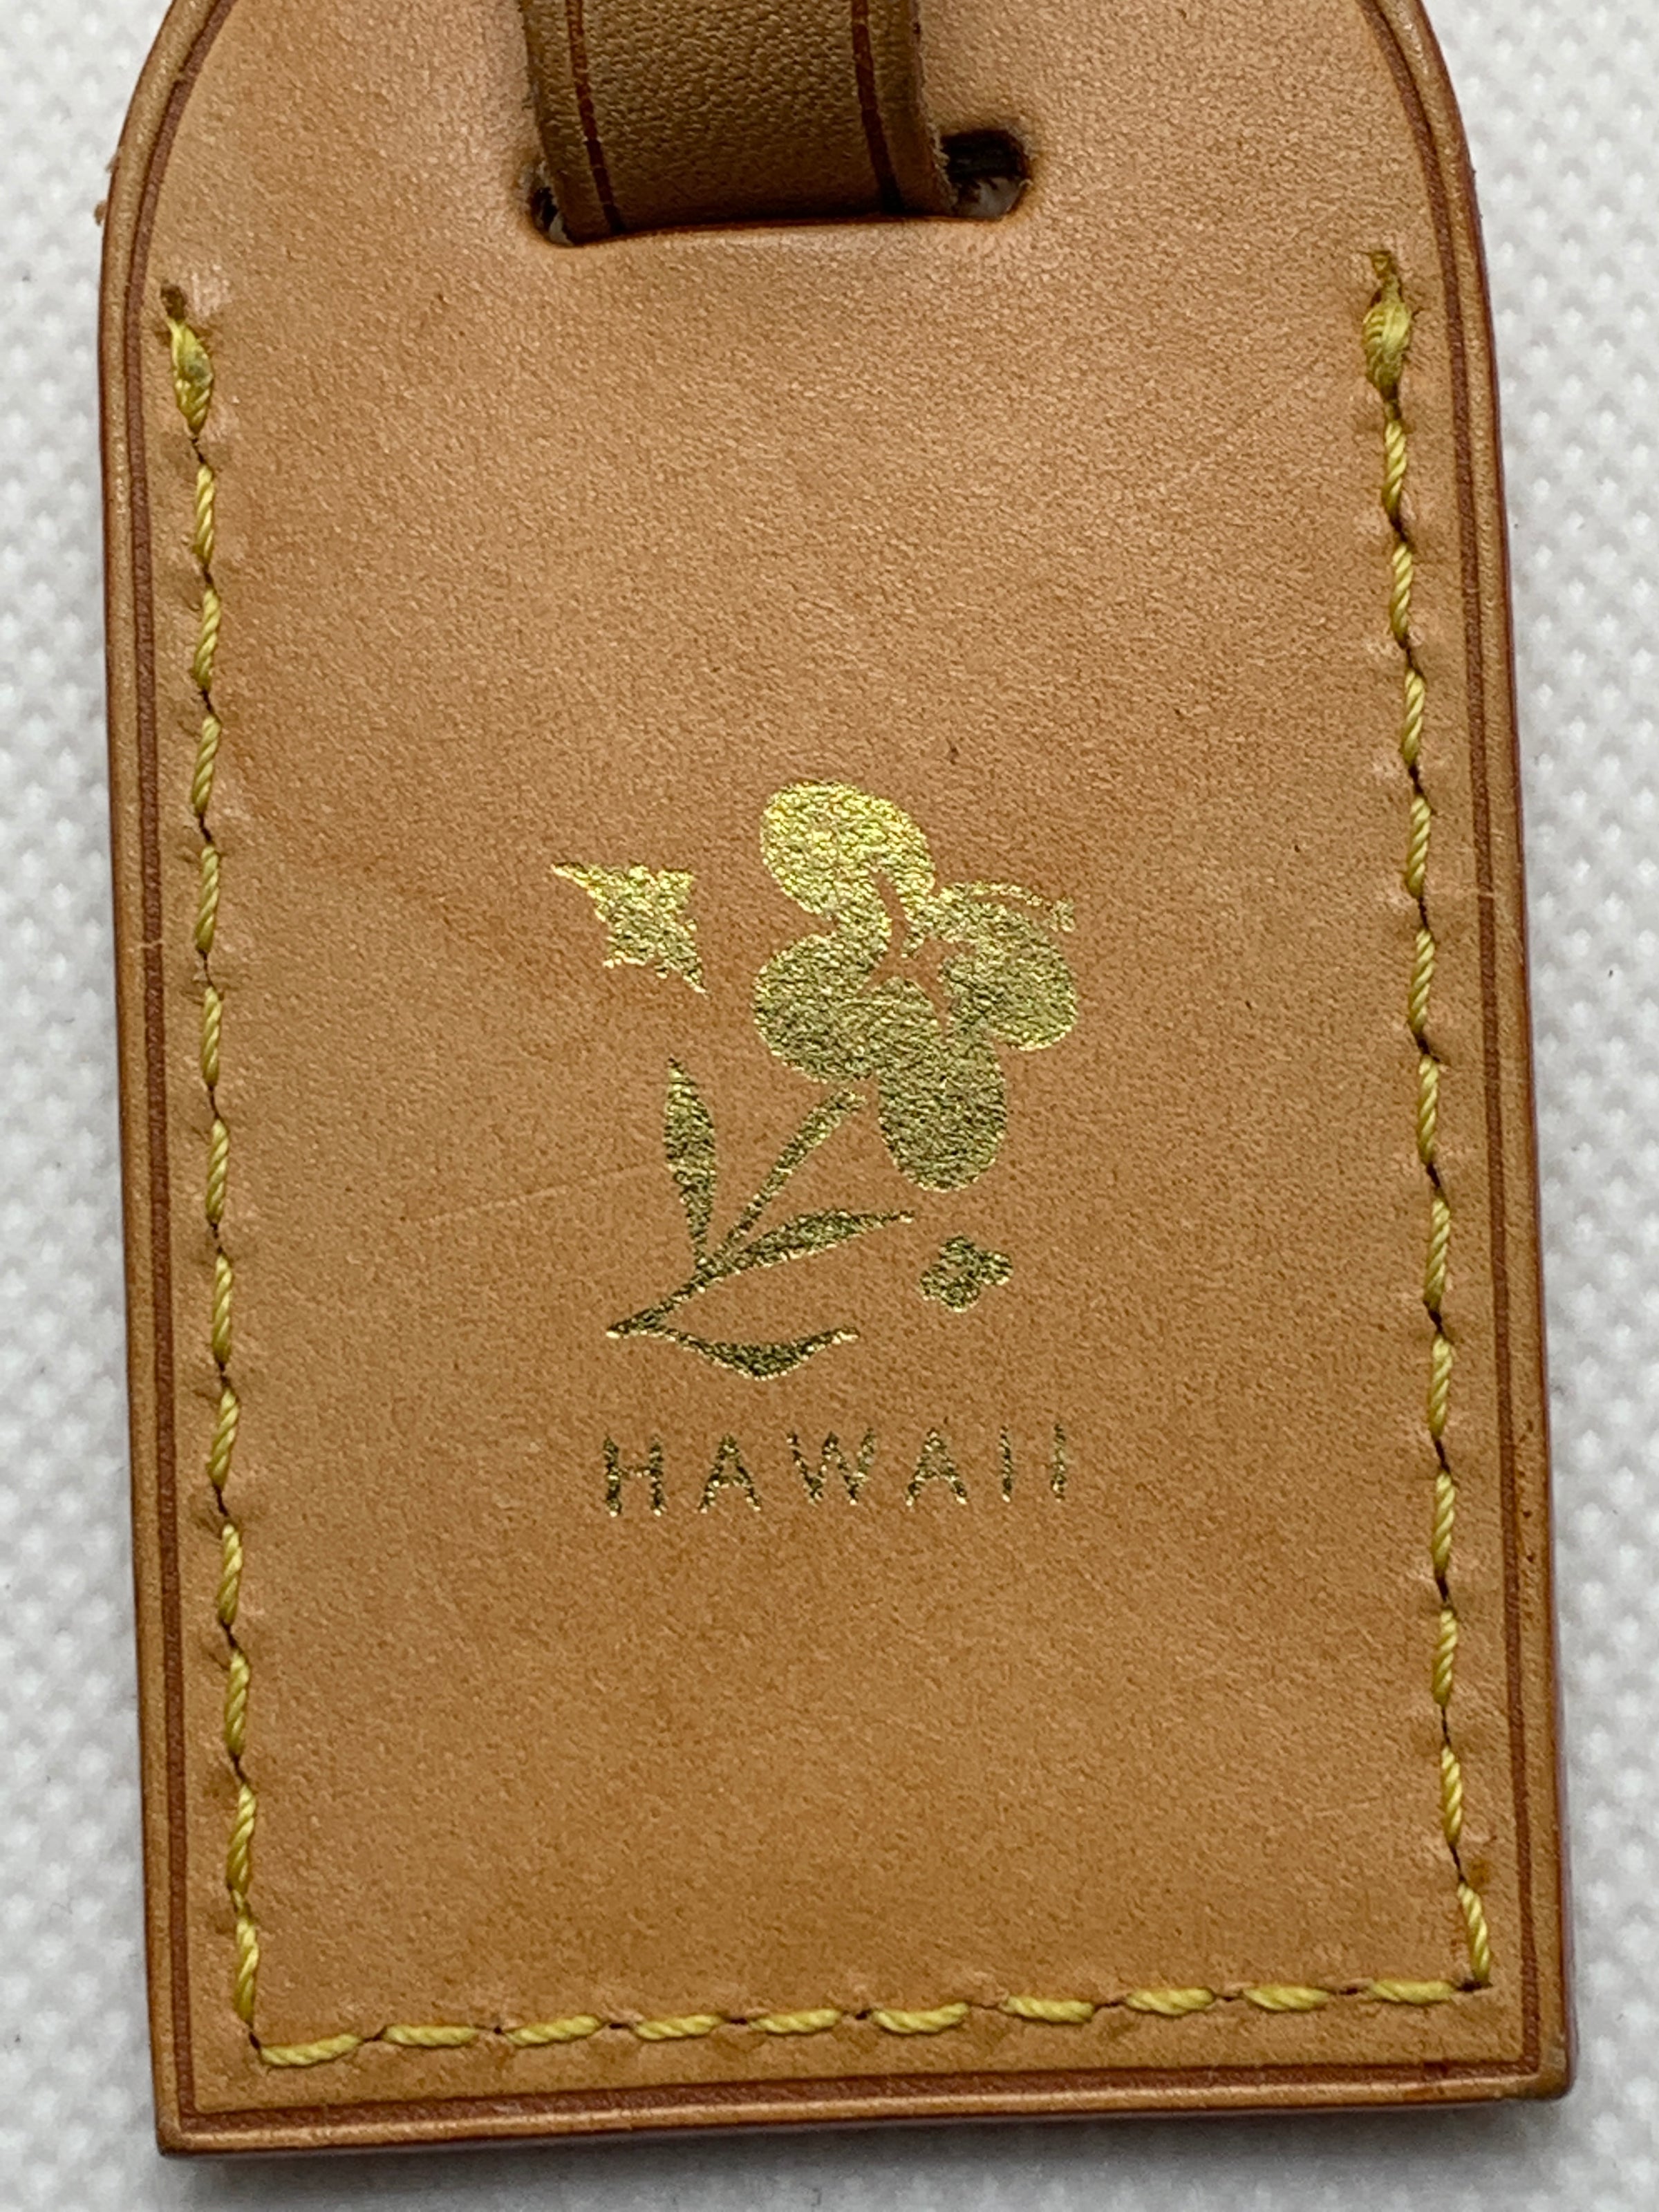 Louis Vuitton luggage tag with Hawaii flower heat stamped in gold